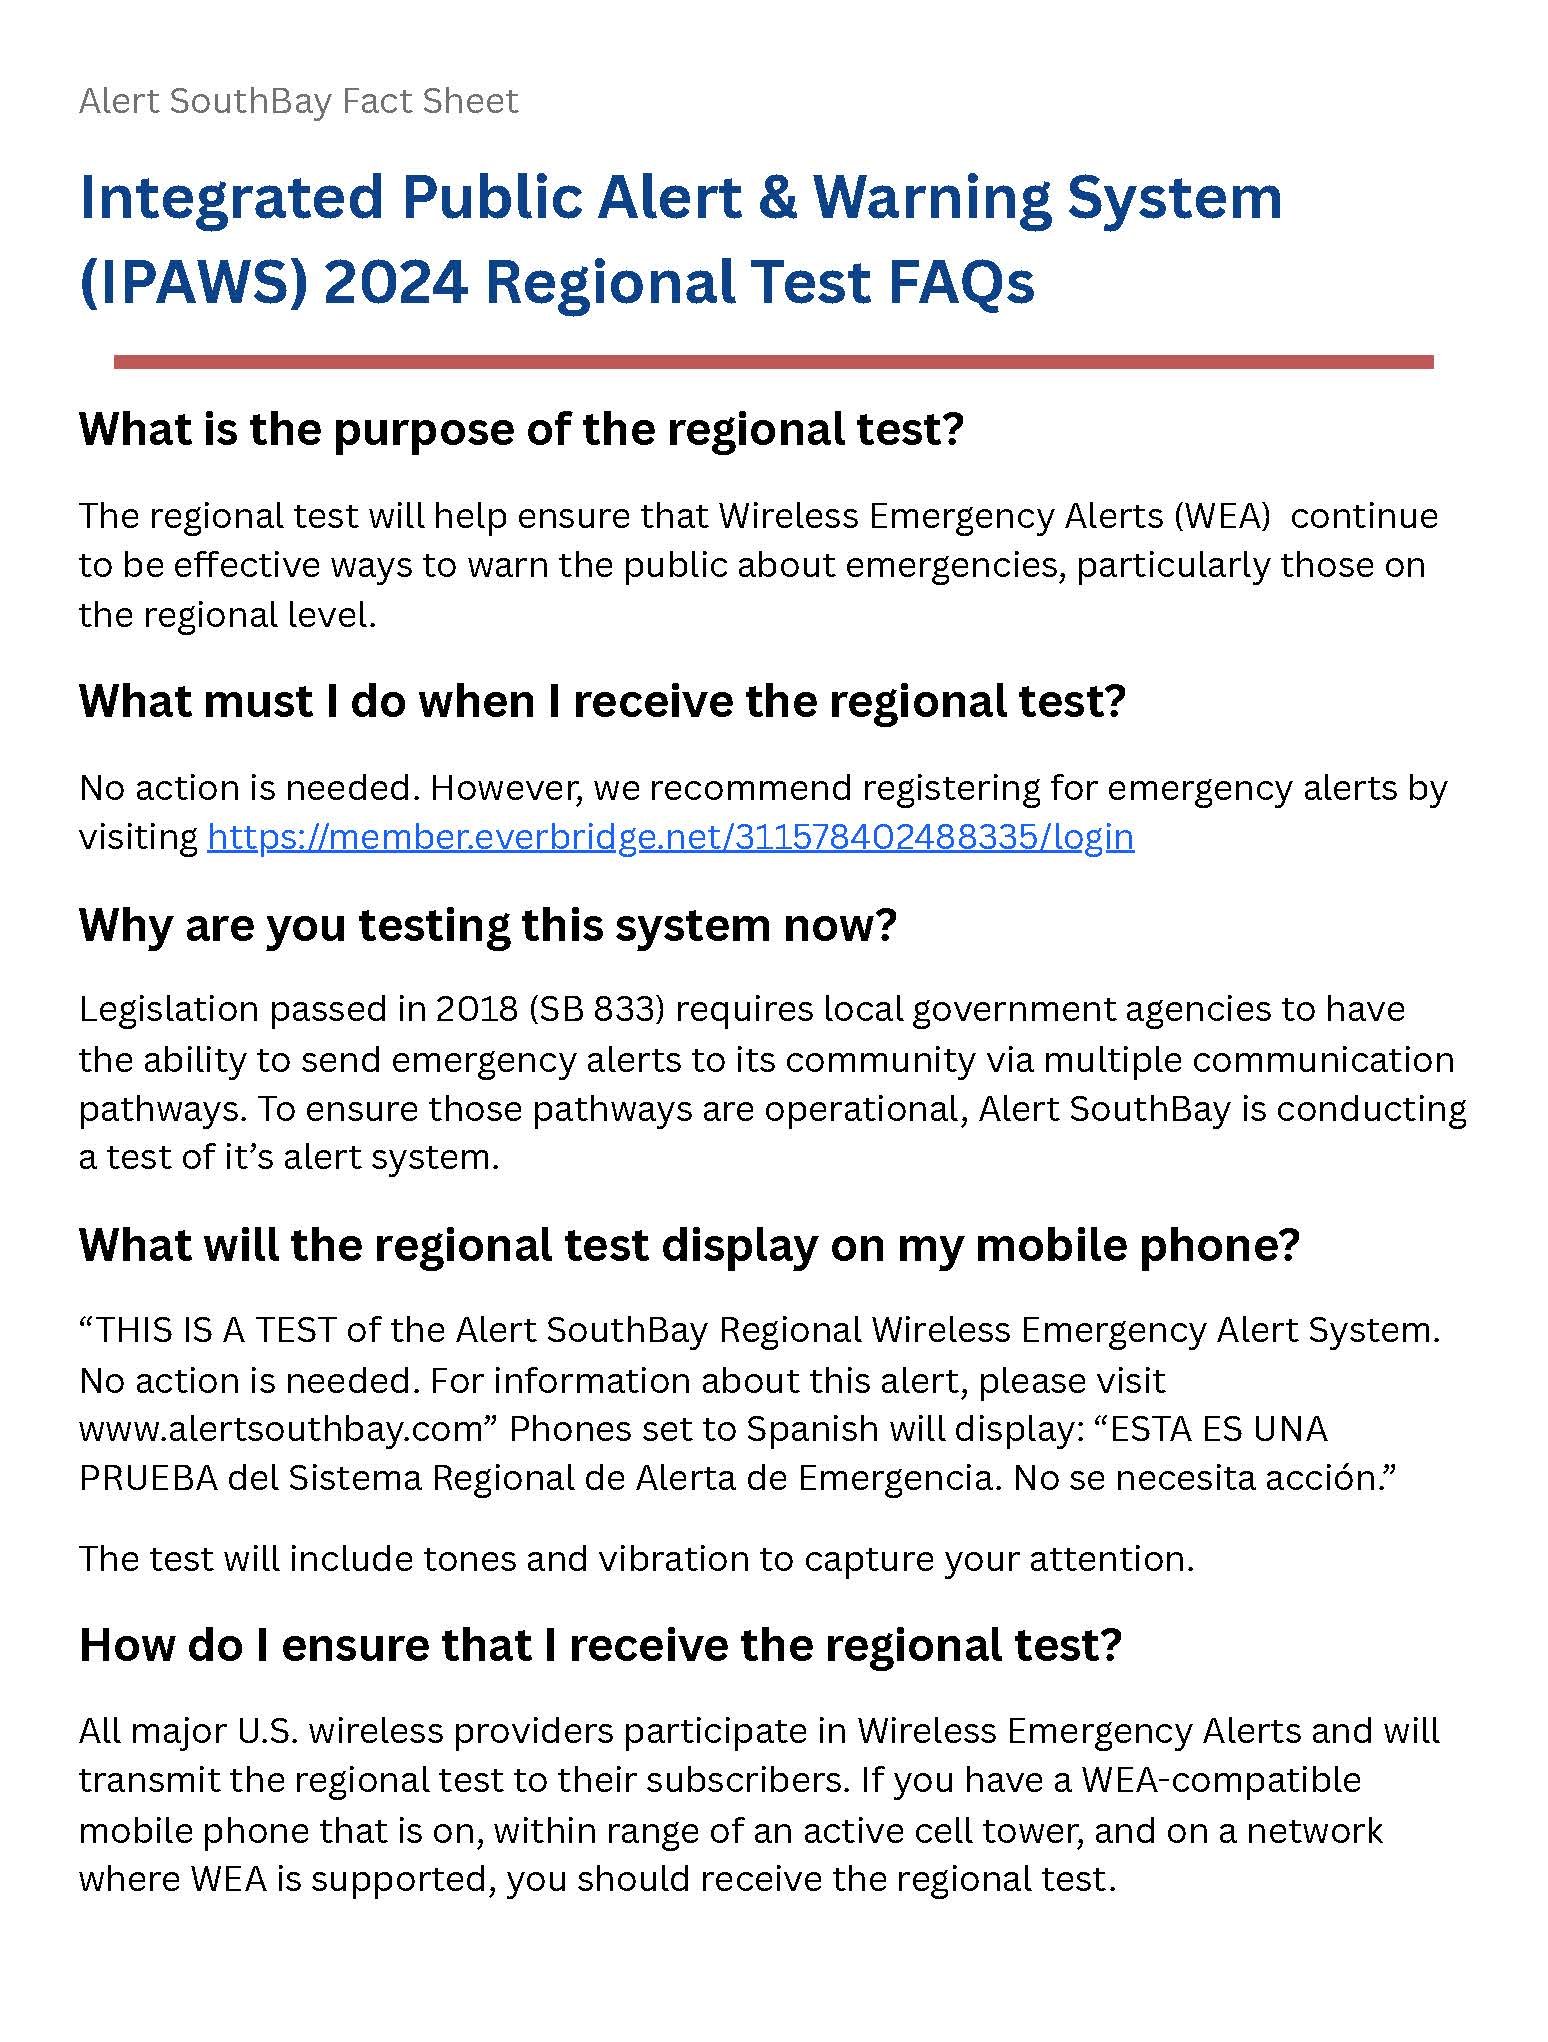 Integrated Public Alert & Warning System (IPAWS) 2024 Regional Test FAQs-2_Page_1.jpg